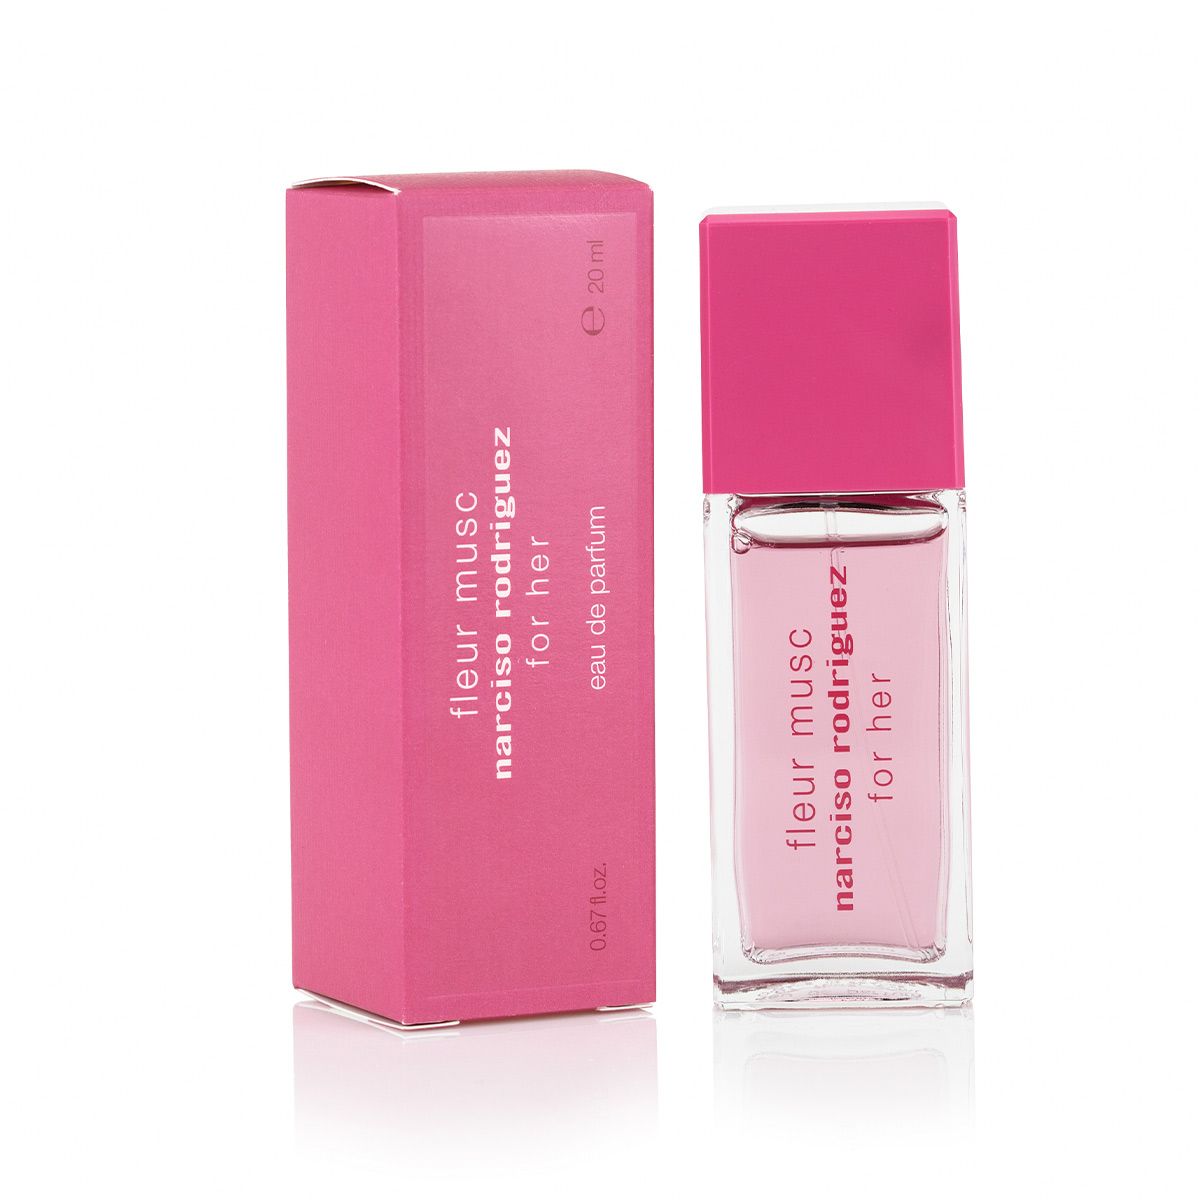  Narciso Rodriguez For Her Fleur Musc Travel Spray 